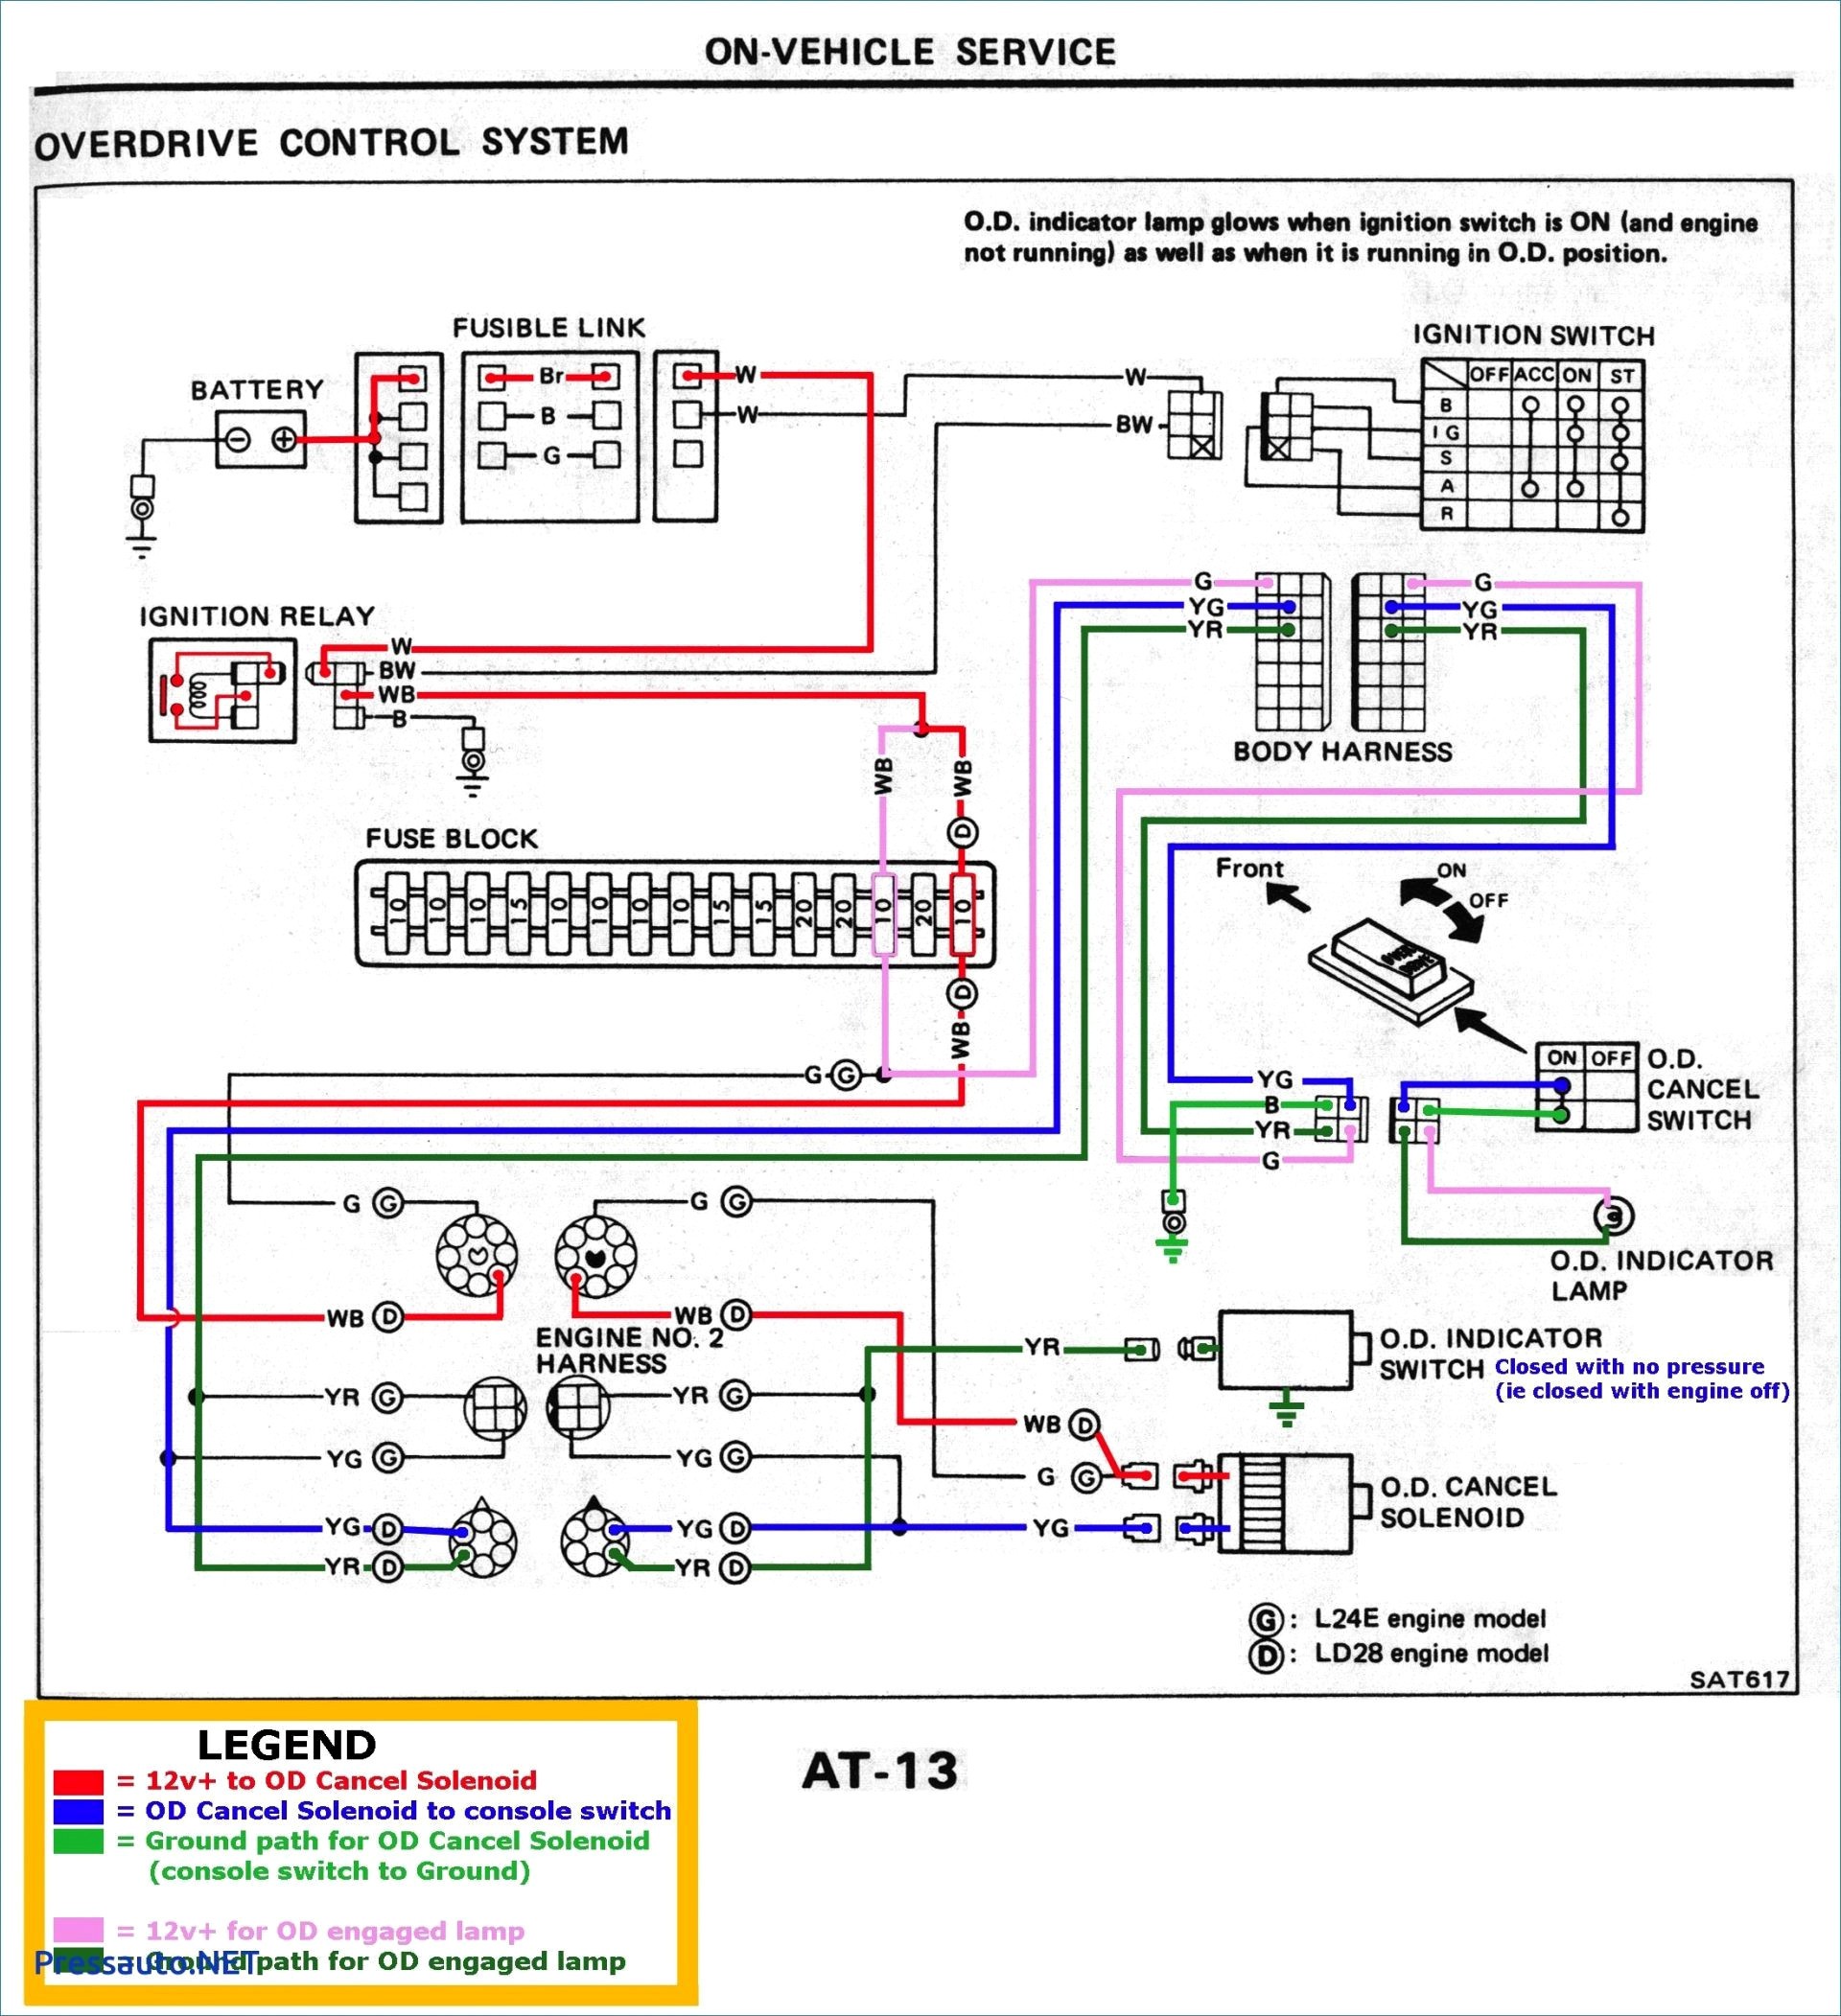 2002 Nissan Frontier Engine Diagram Nissan Frontier Trailer Wiring Diagram Shahsramblings Of 2002 Nissan Frontier Engine Diagram